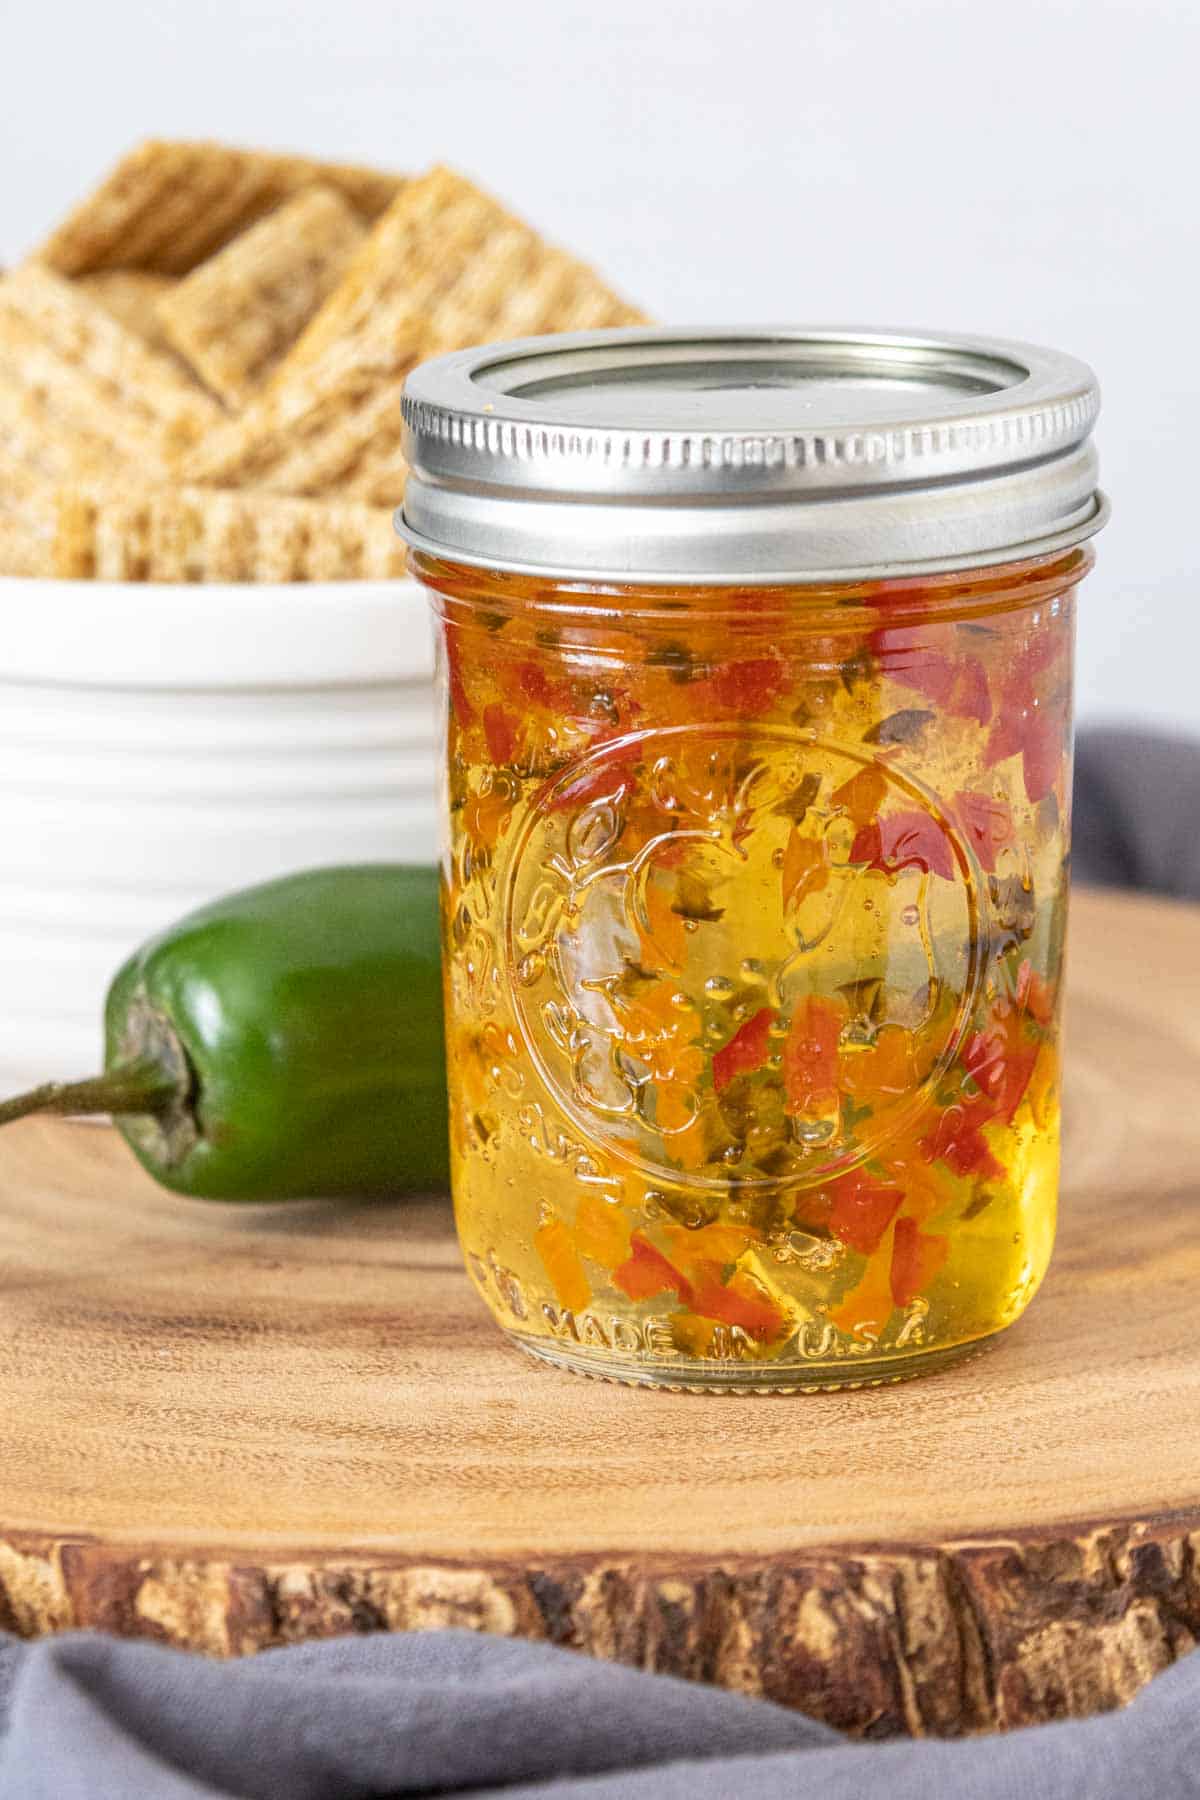 Jar of jalapeño jelly on a wood tray with a jalapeño and crackers behind.